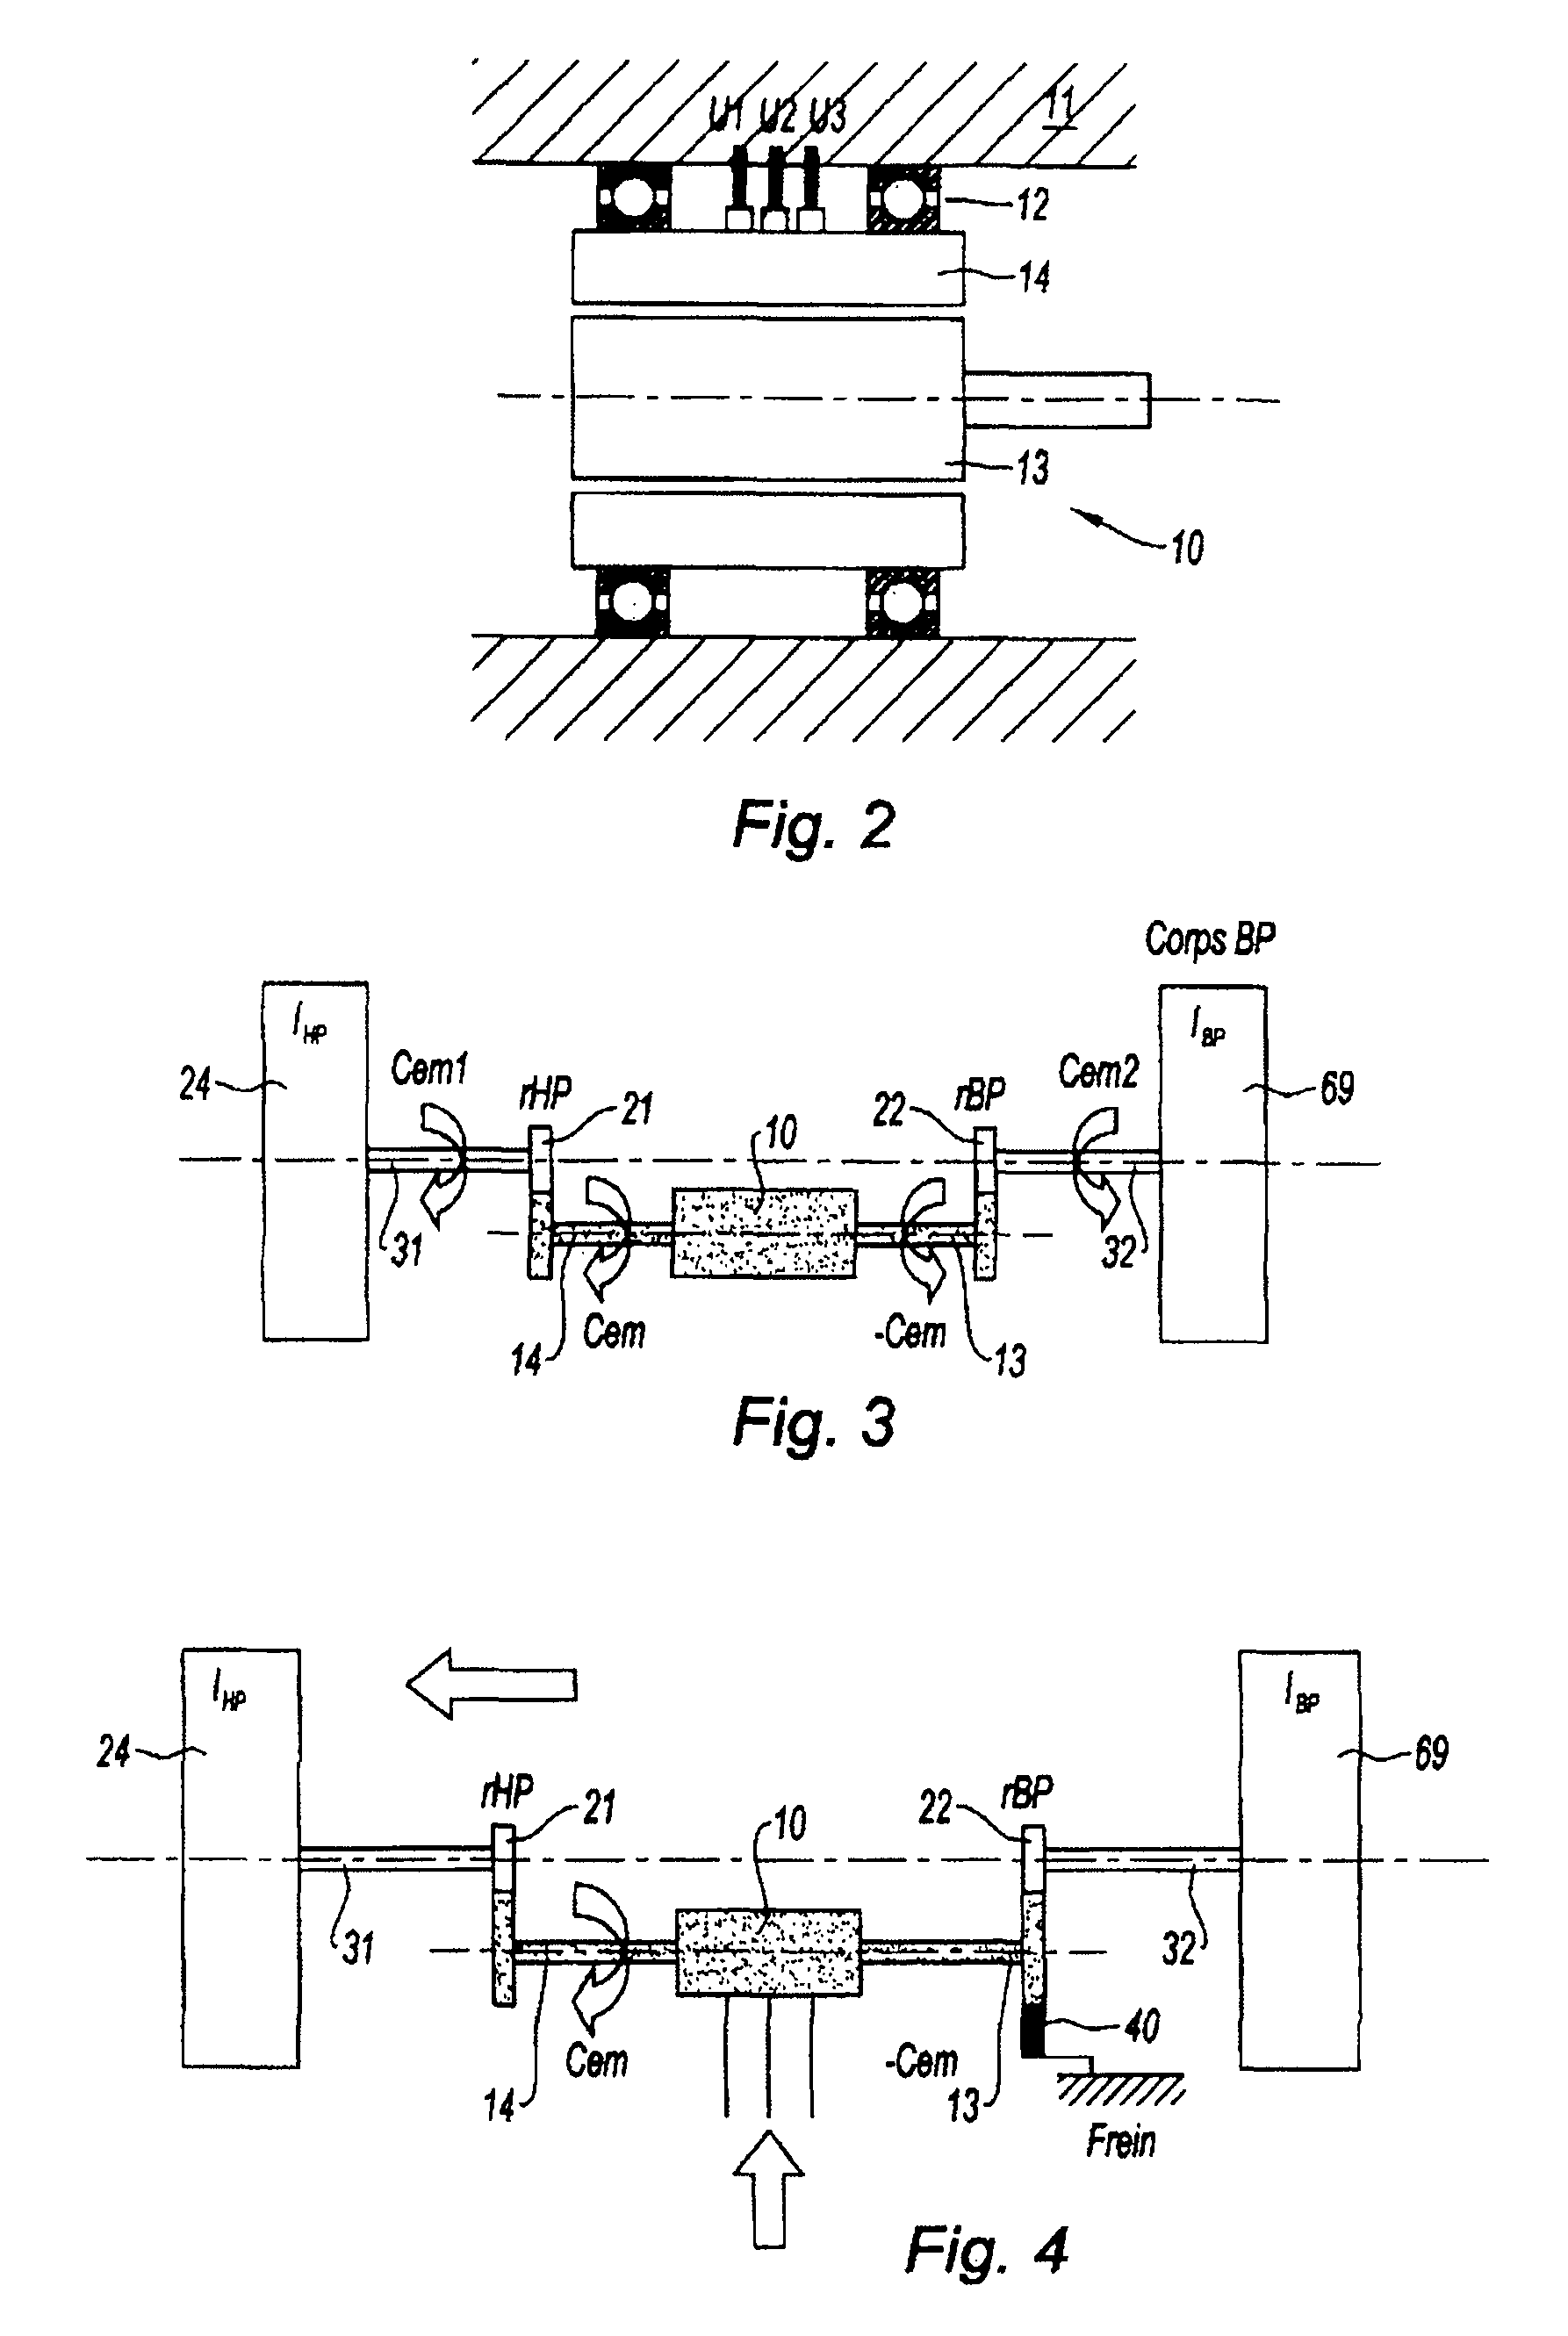 Device for producing electrical power in a two-spool gas turbine engine